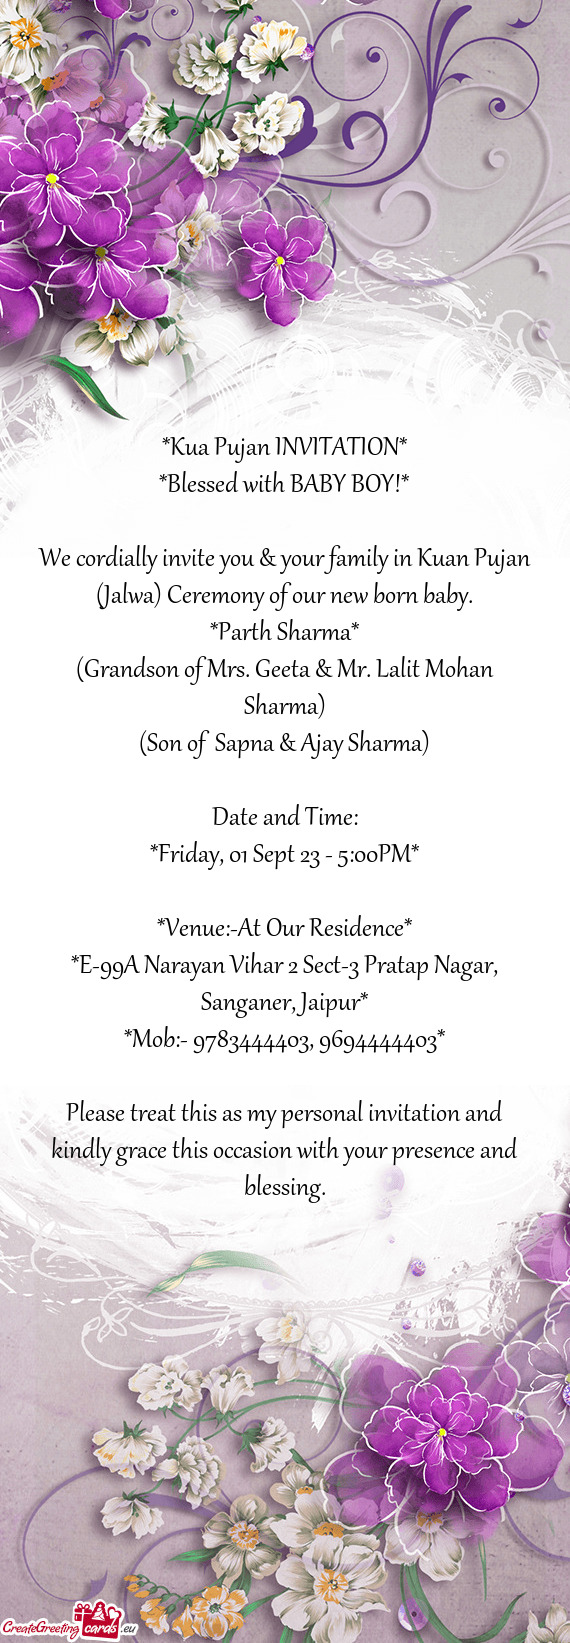 We cordially invite you & your family in Kuan Pujan (Jalwa) Ceremony of our new born baby